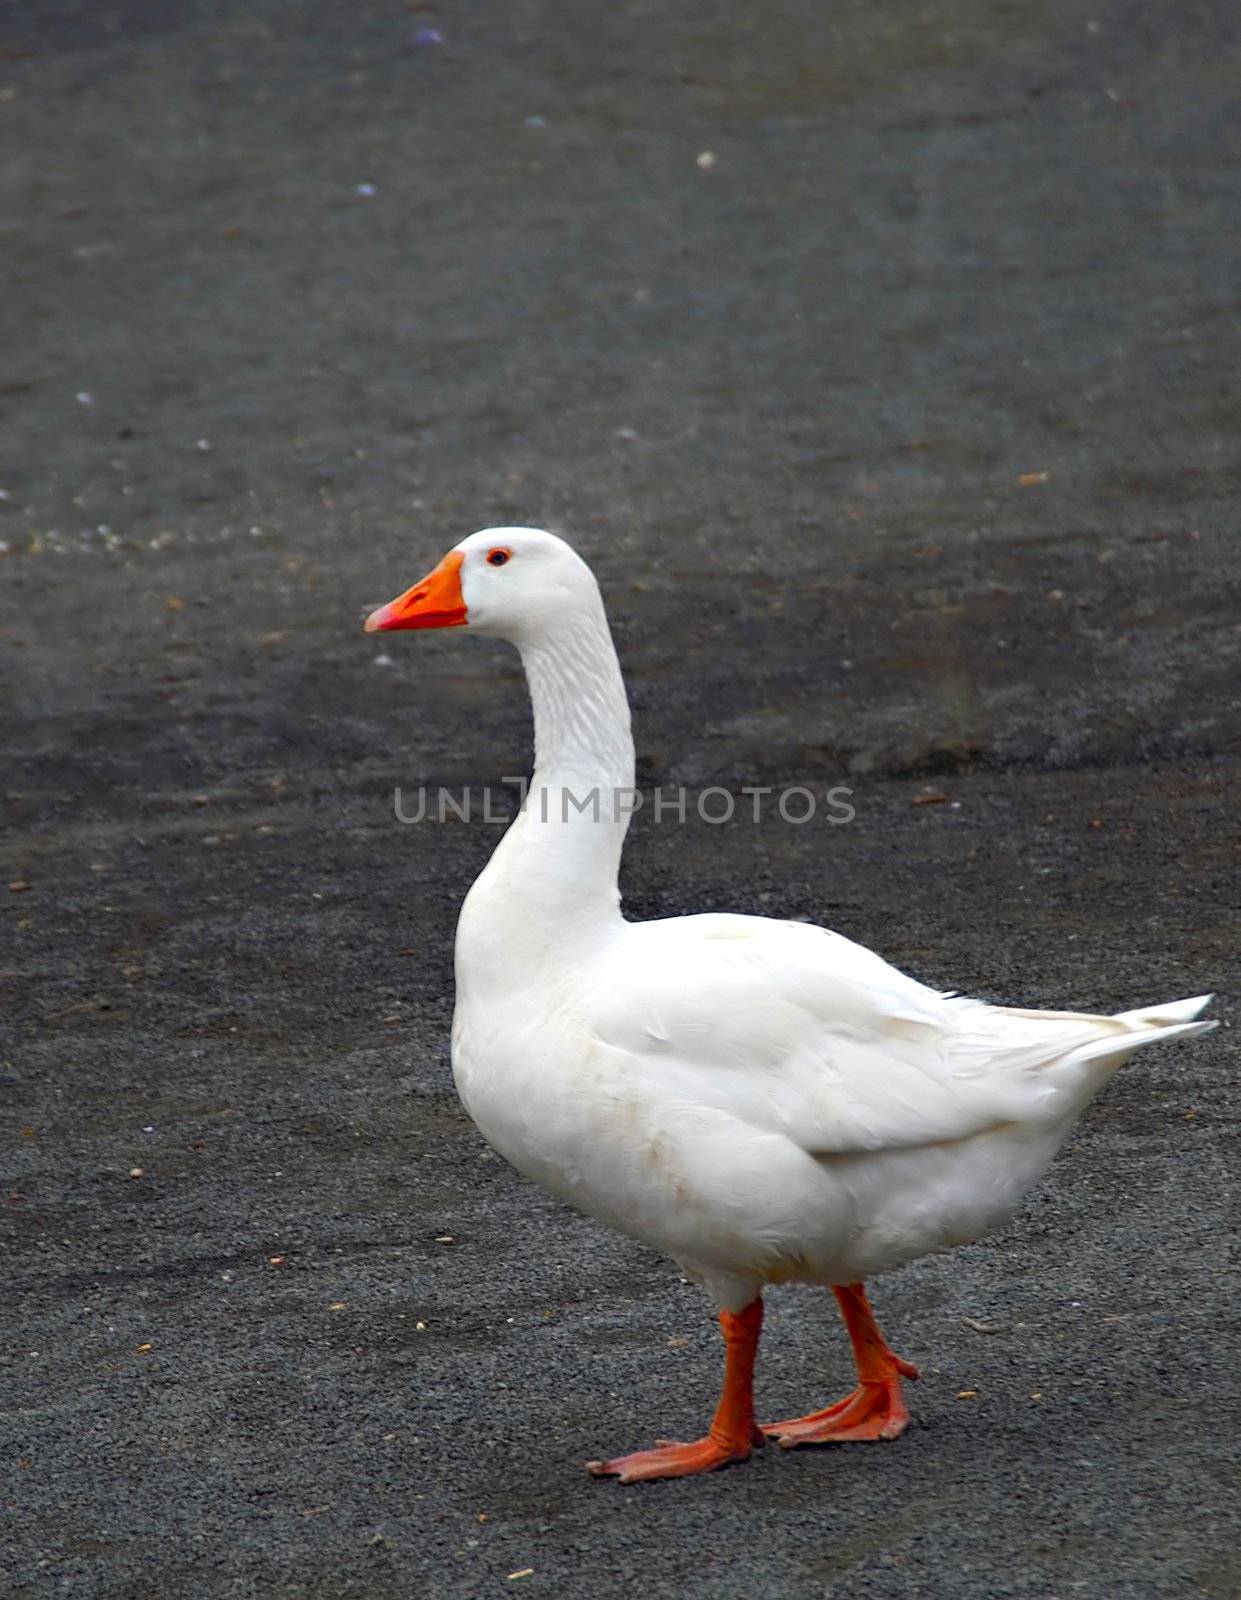 A white duck walking on the pavement